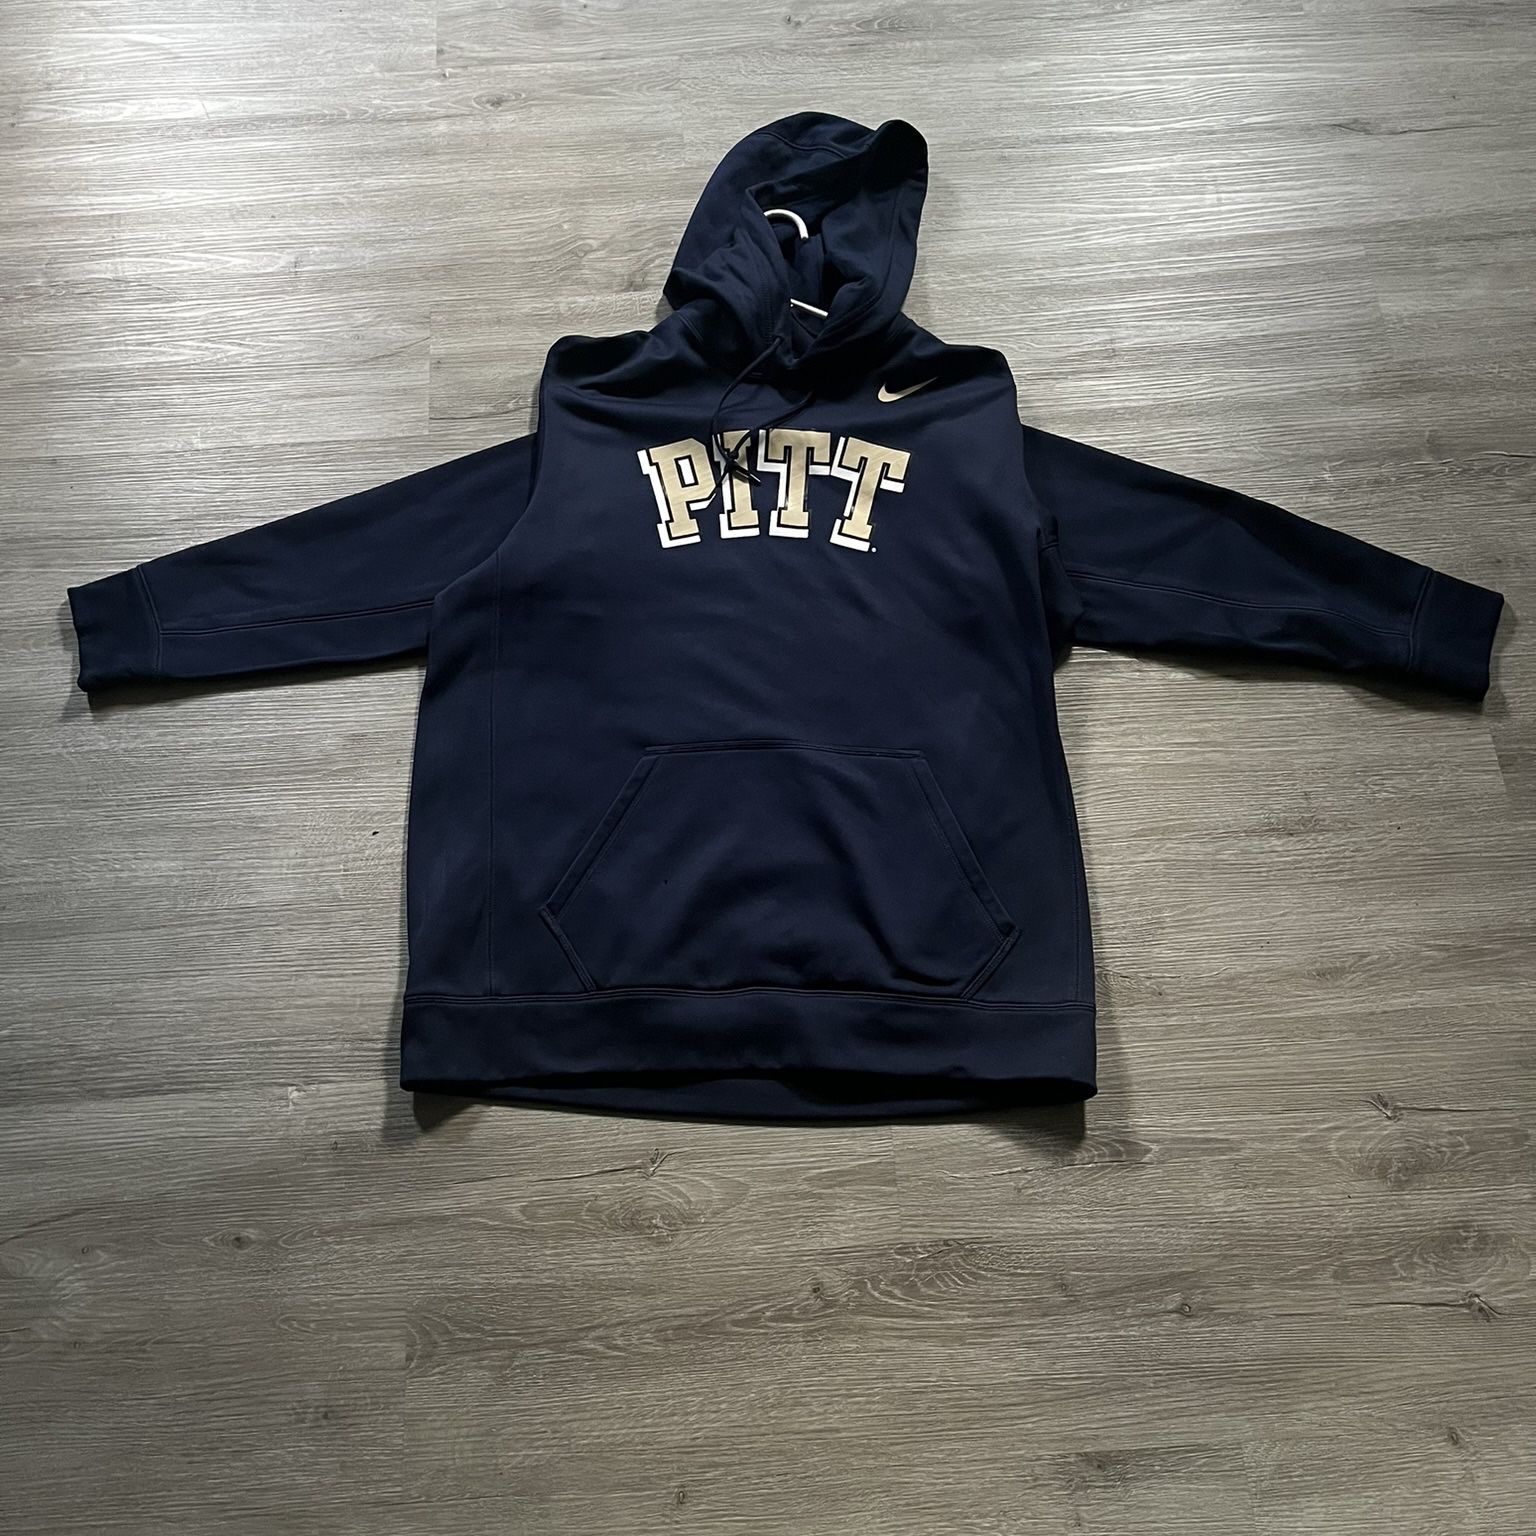 $25  Nike Pitt Panther Hoodie Nittany Blue Gold Pitt Lettering Sports Team Hoodie College 